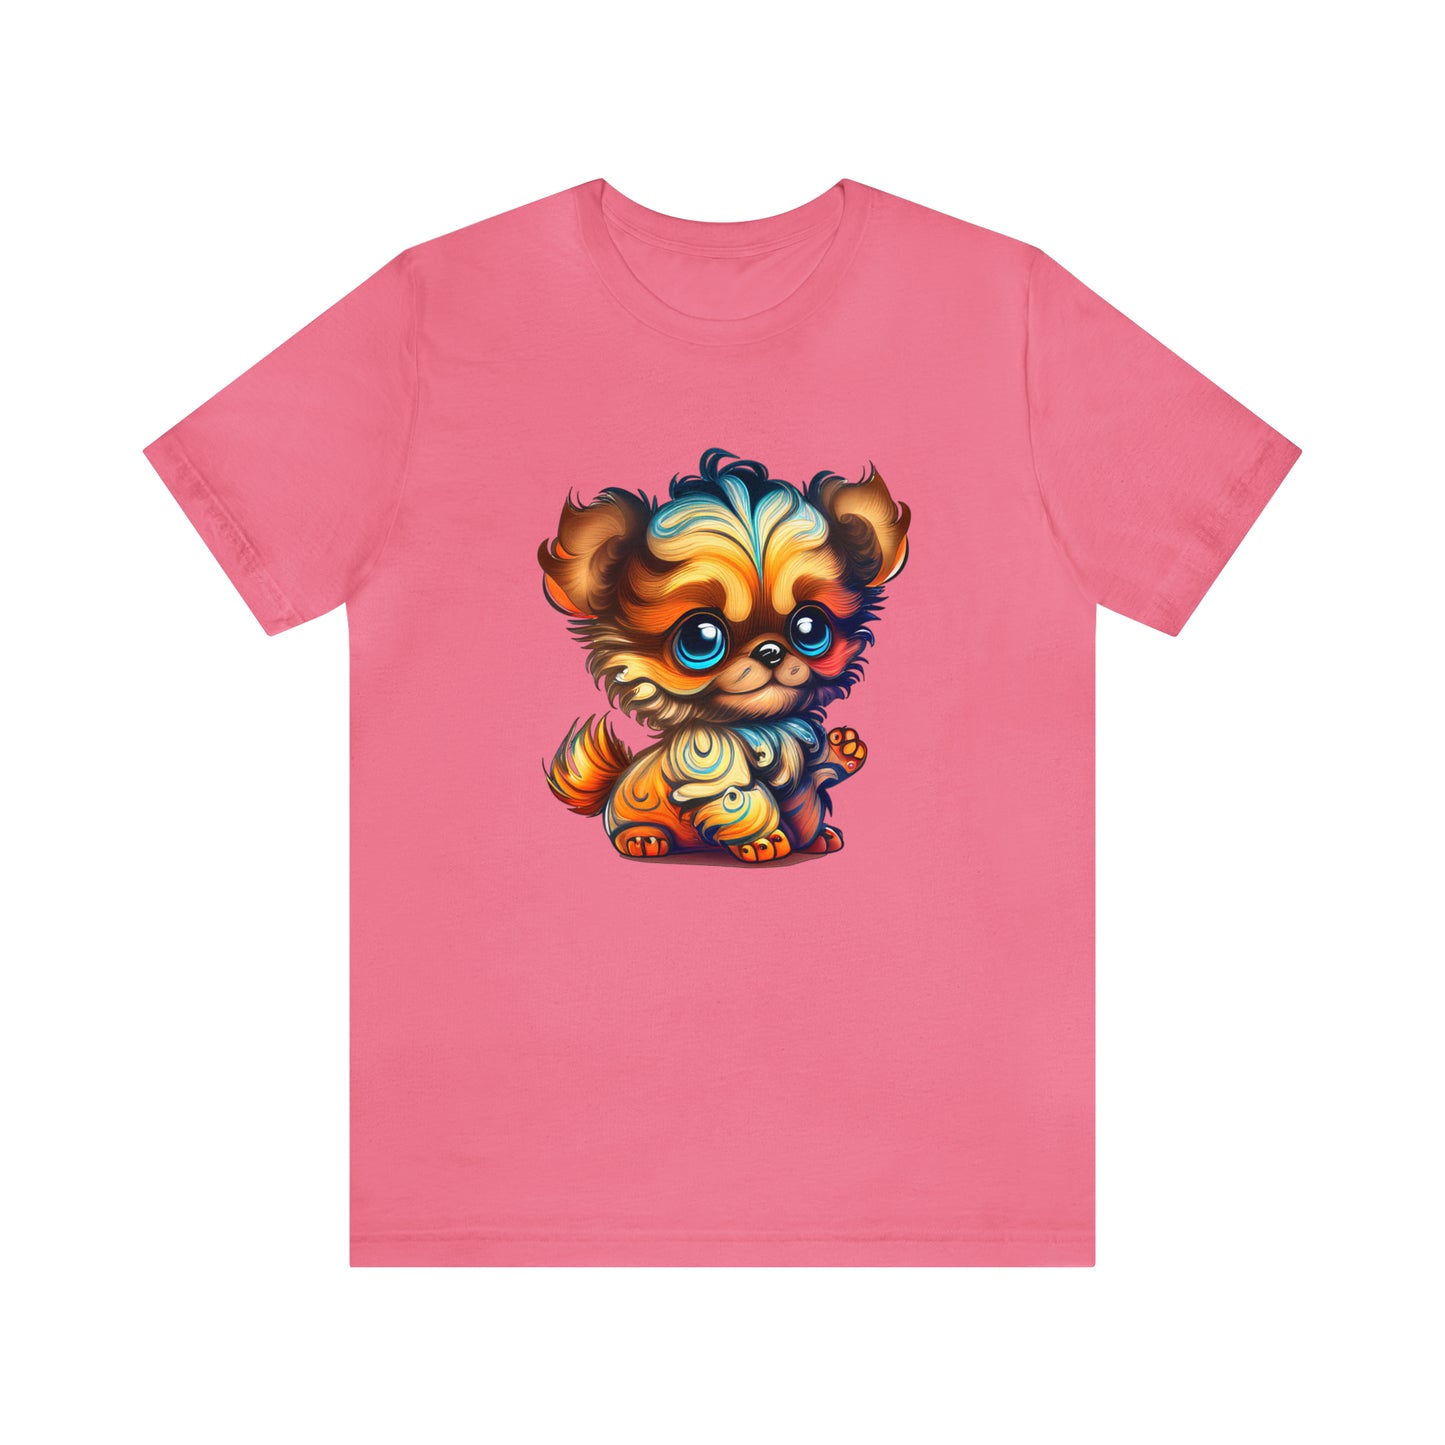 psychedelicBRANDz's Woof Wave Wonder featuring a cute puppy on a pink shirt